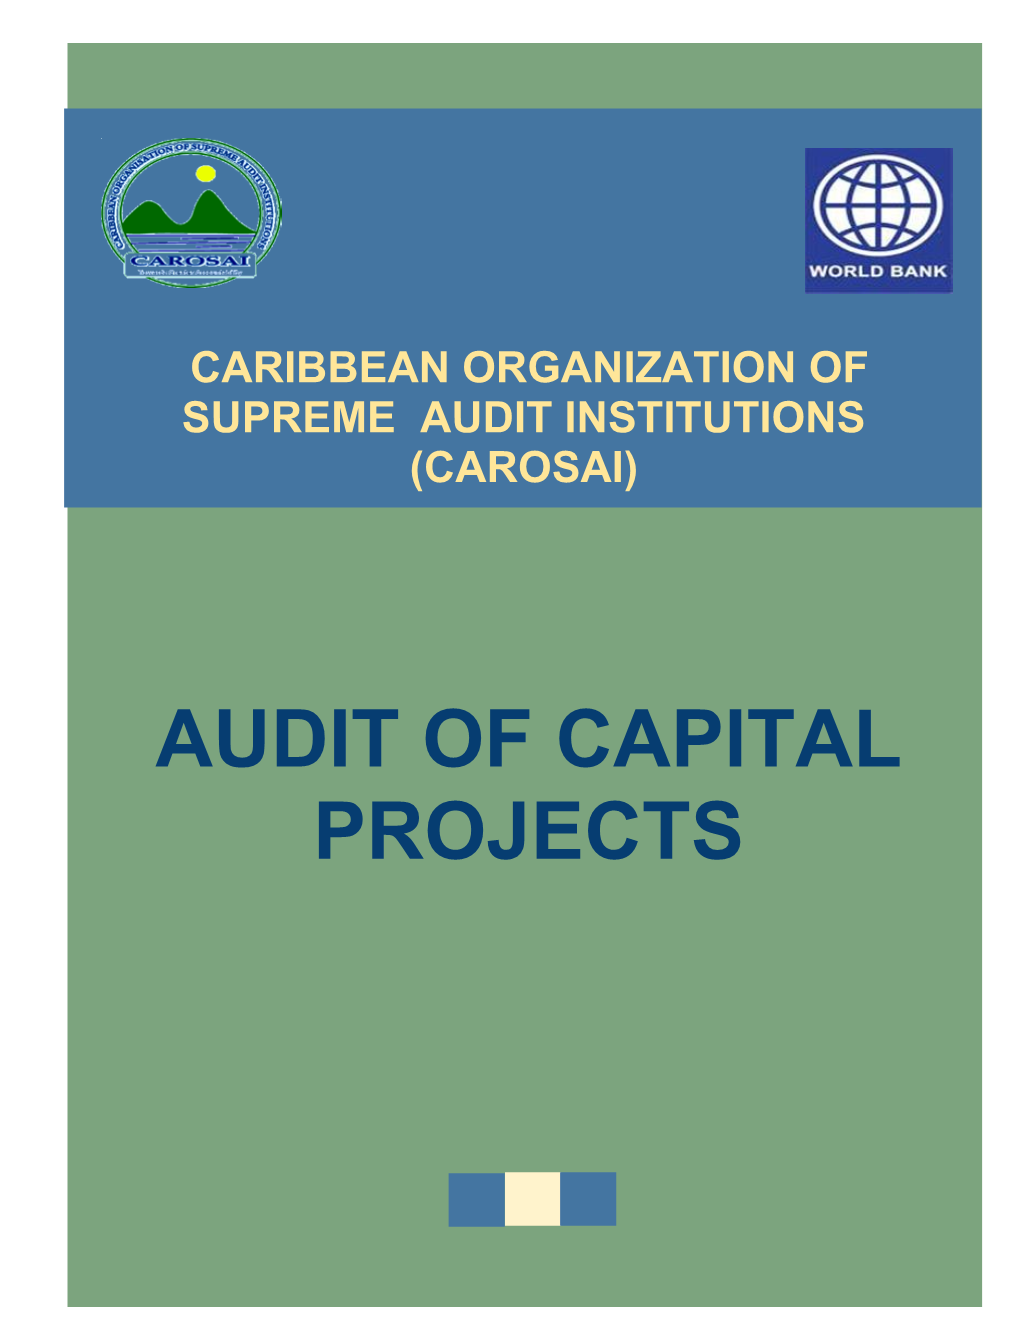 Audit of Capital Projects